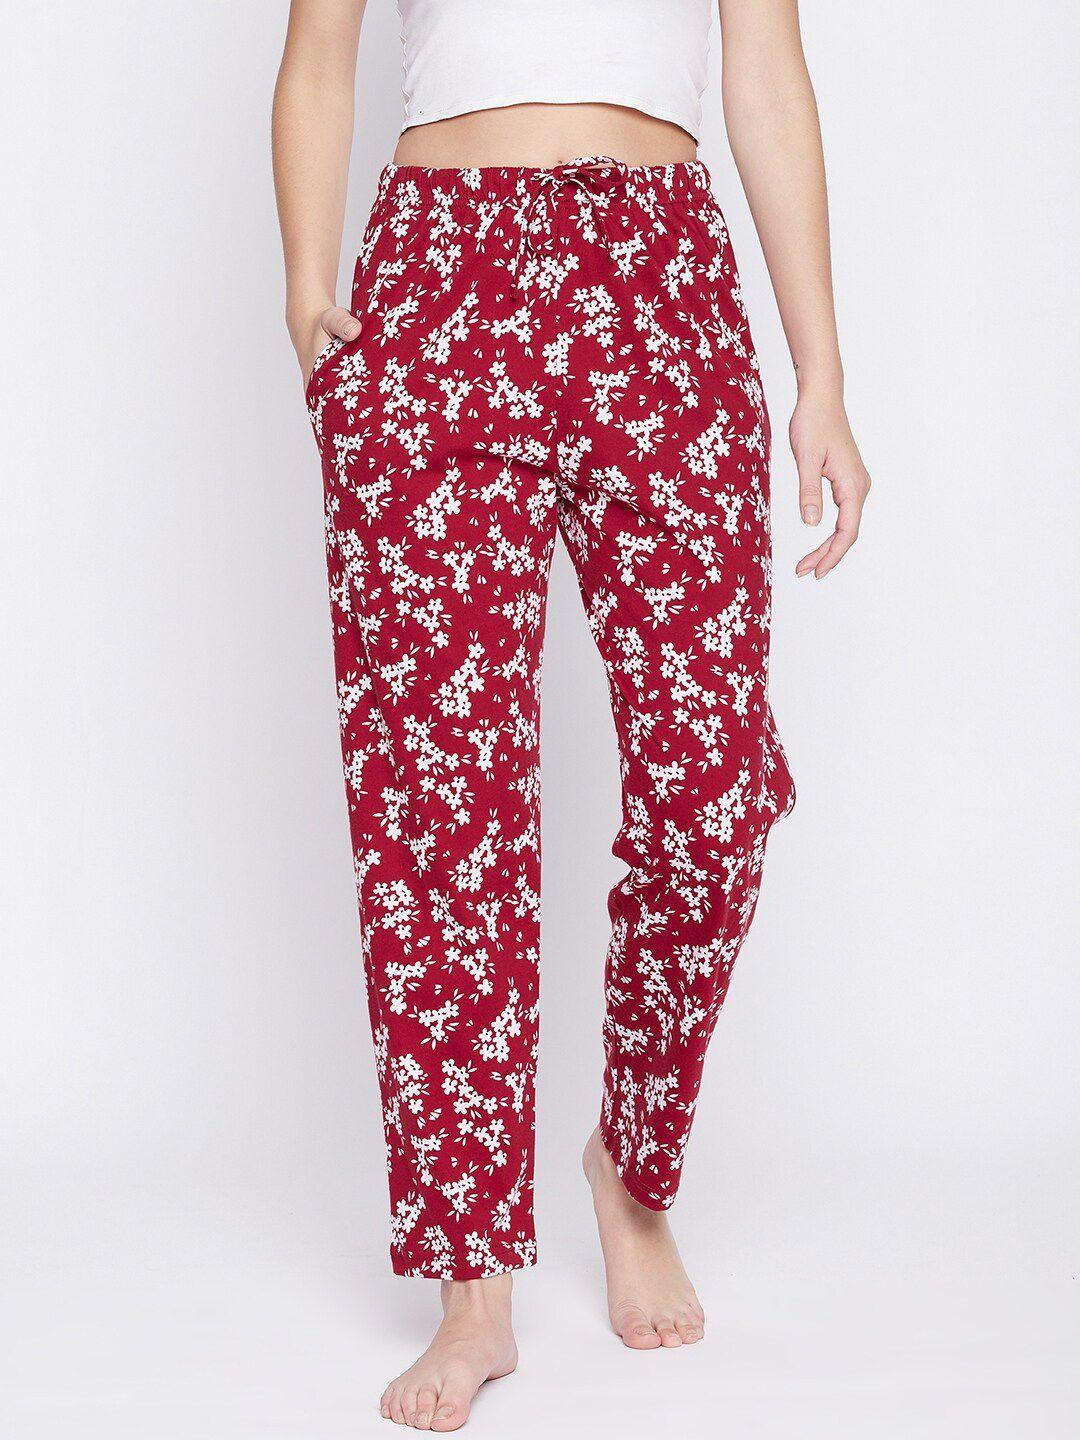 c9 airwear women red & white floral printed pure cotton lounge pants